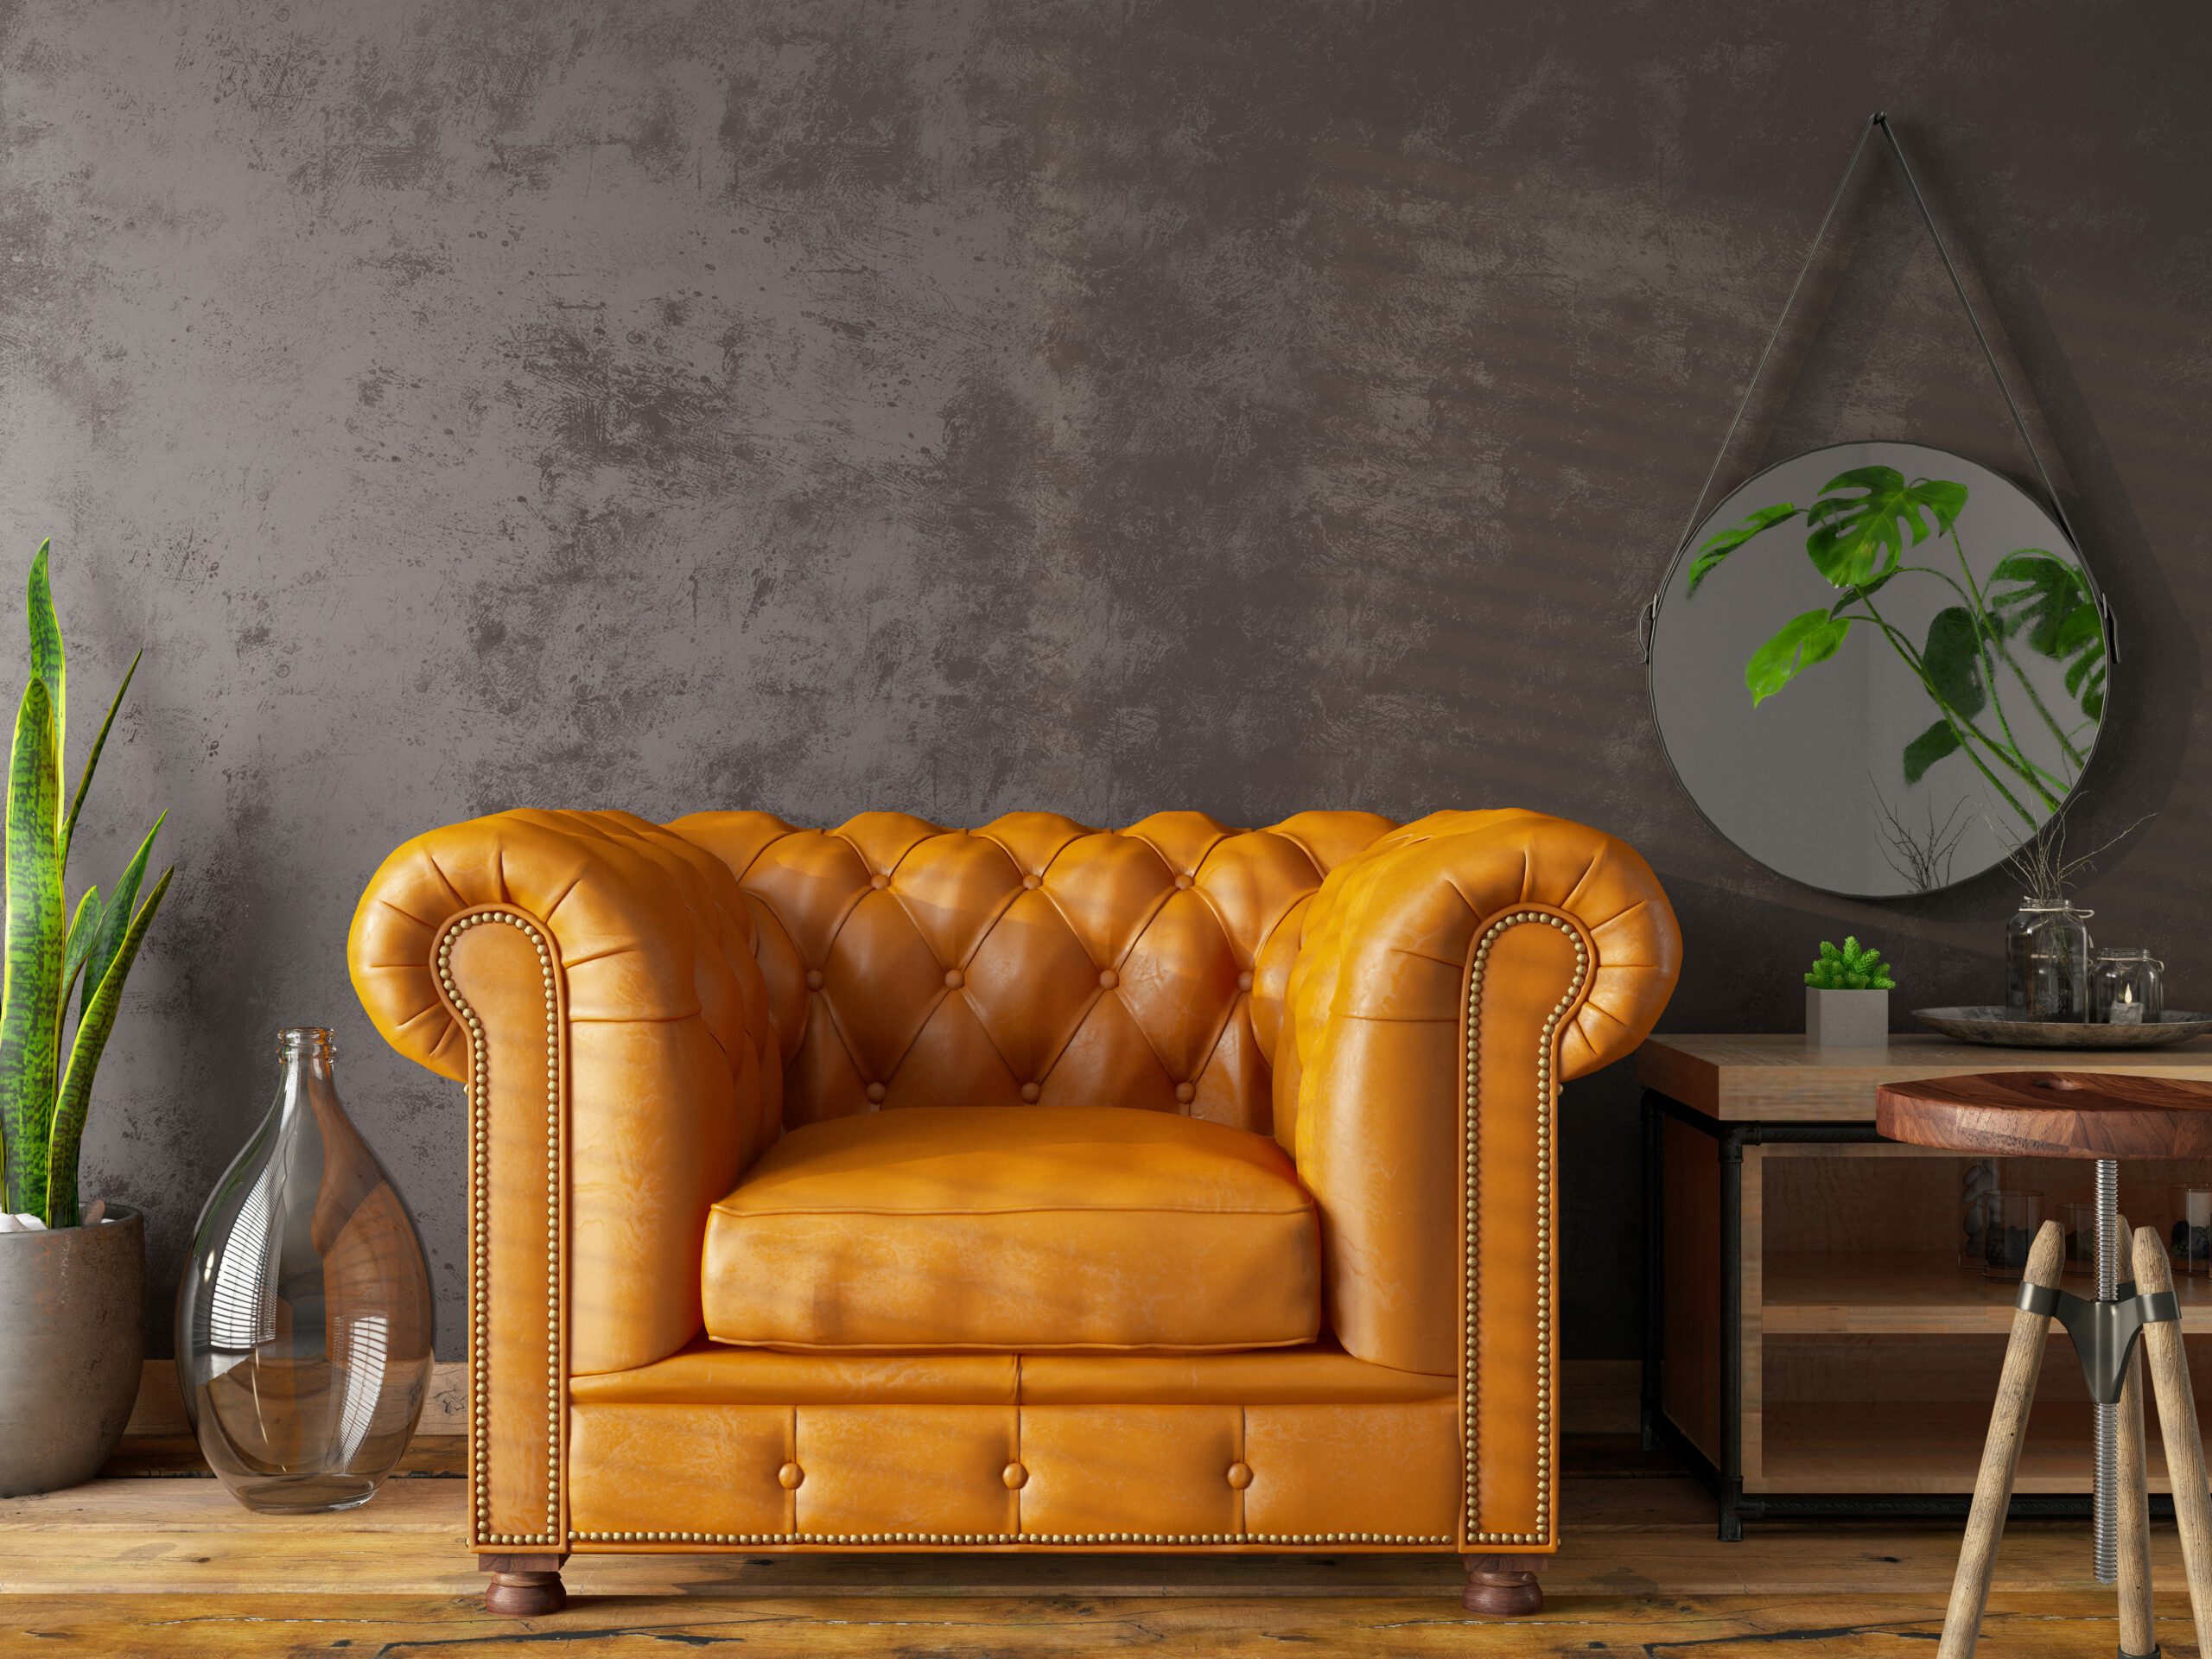 Image of a leather armchair in mustard color.